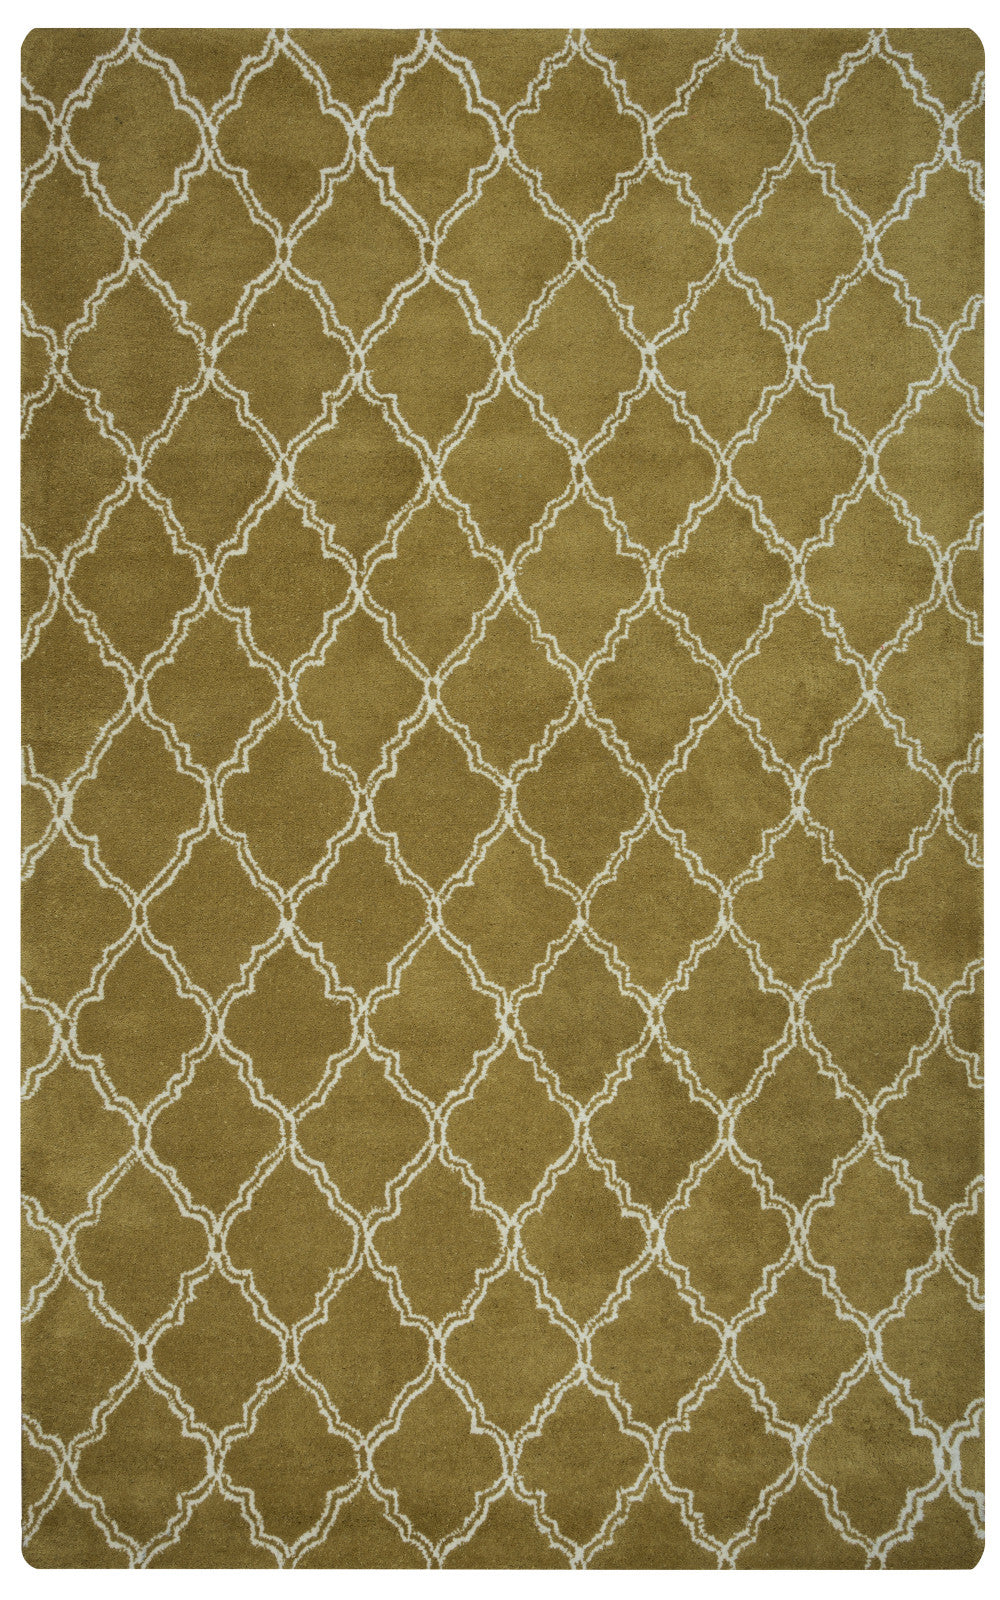 Rizzy Julian Pointe JP8744 Olive Area Rug